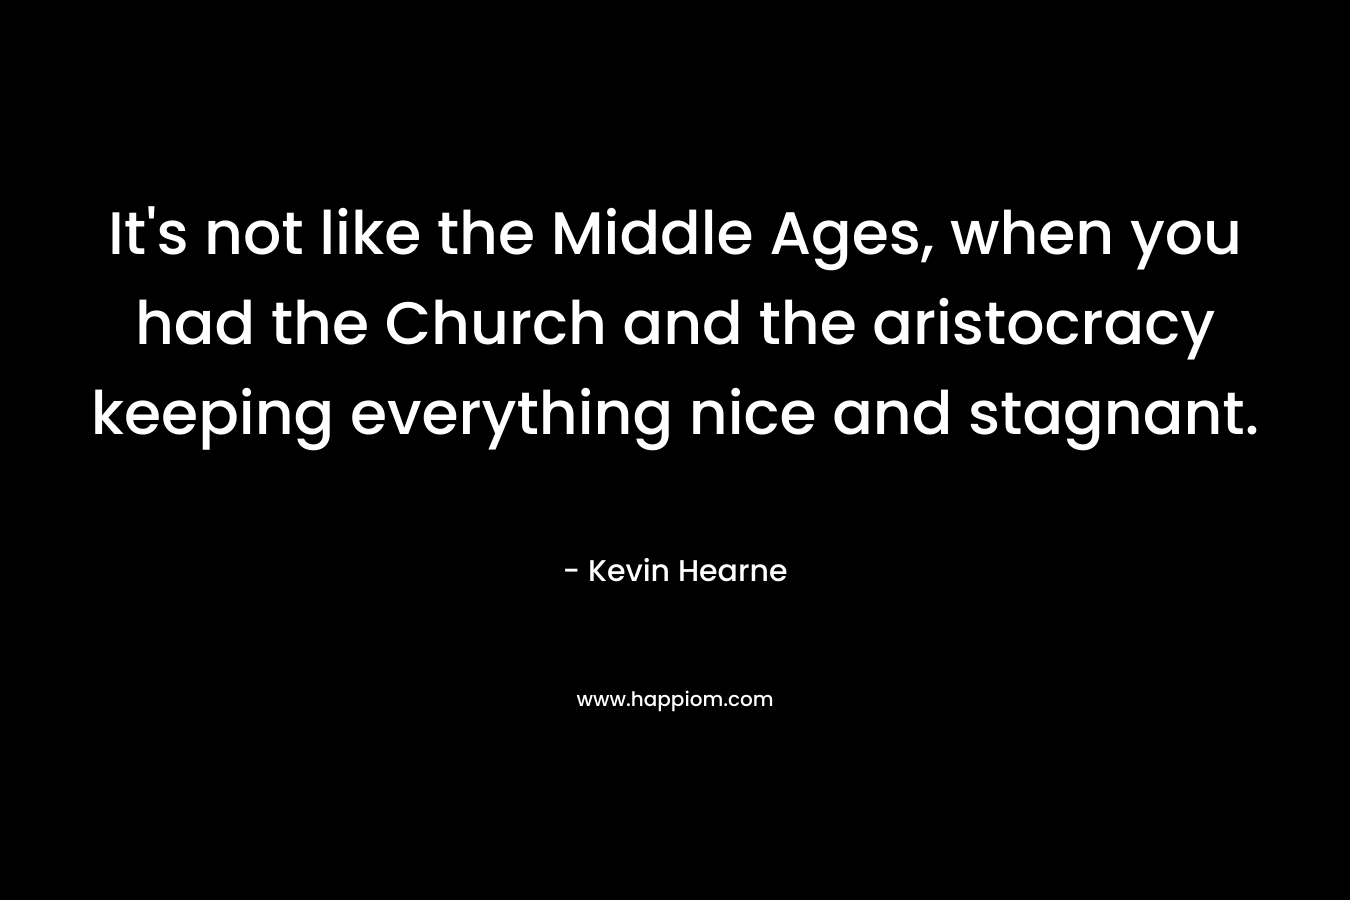 It’s not like the Middle Ages, when you had the Church and the aristocracy keeping everything nice and stagnant. – Kevin Hearne